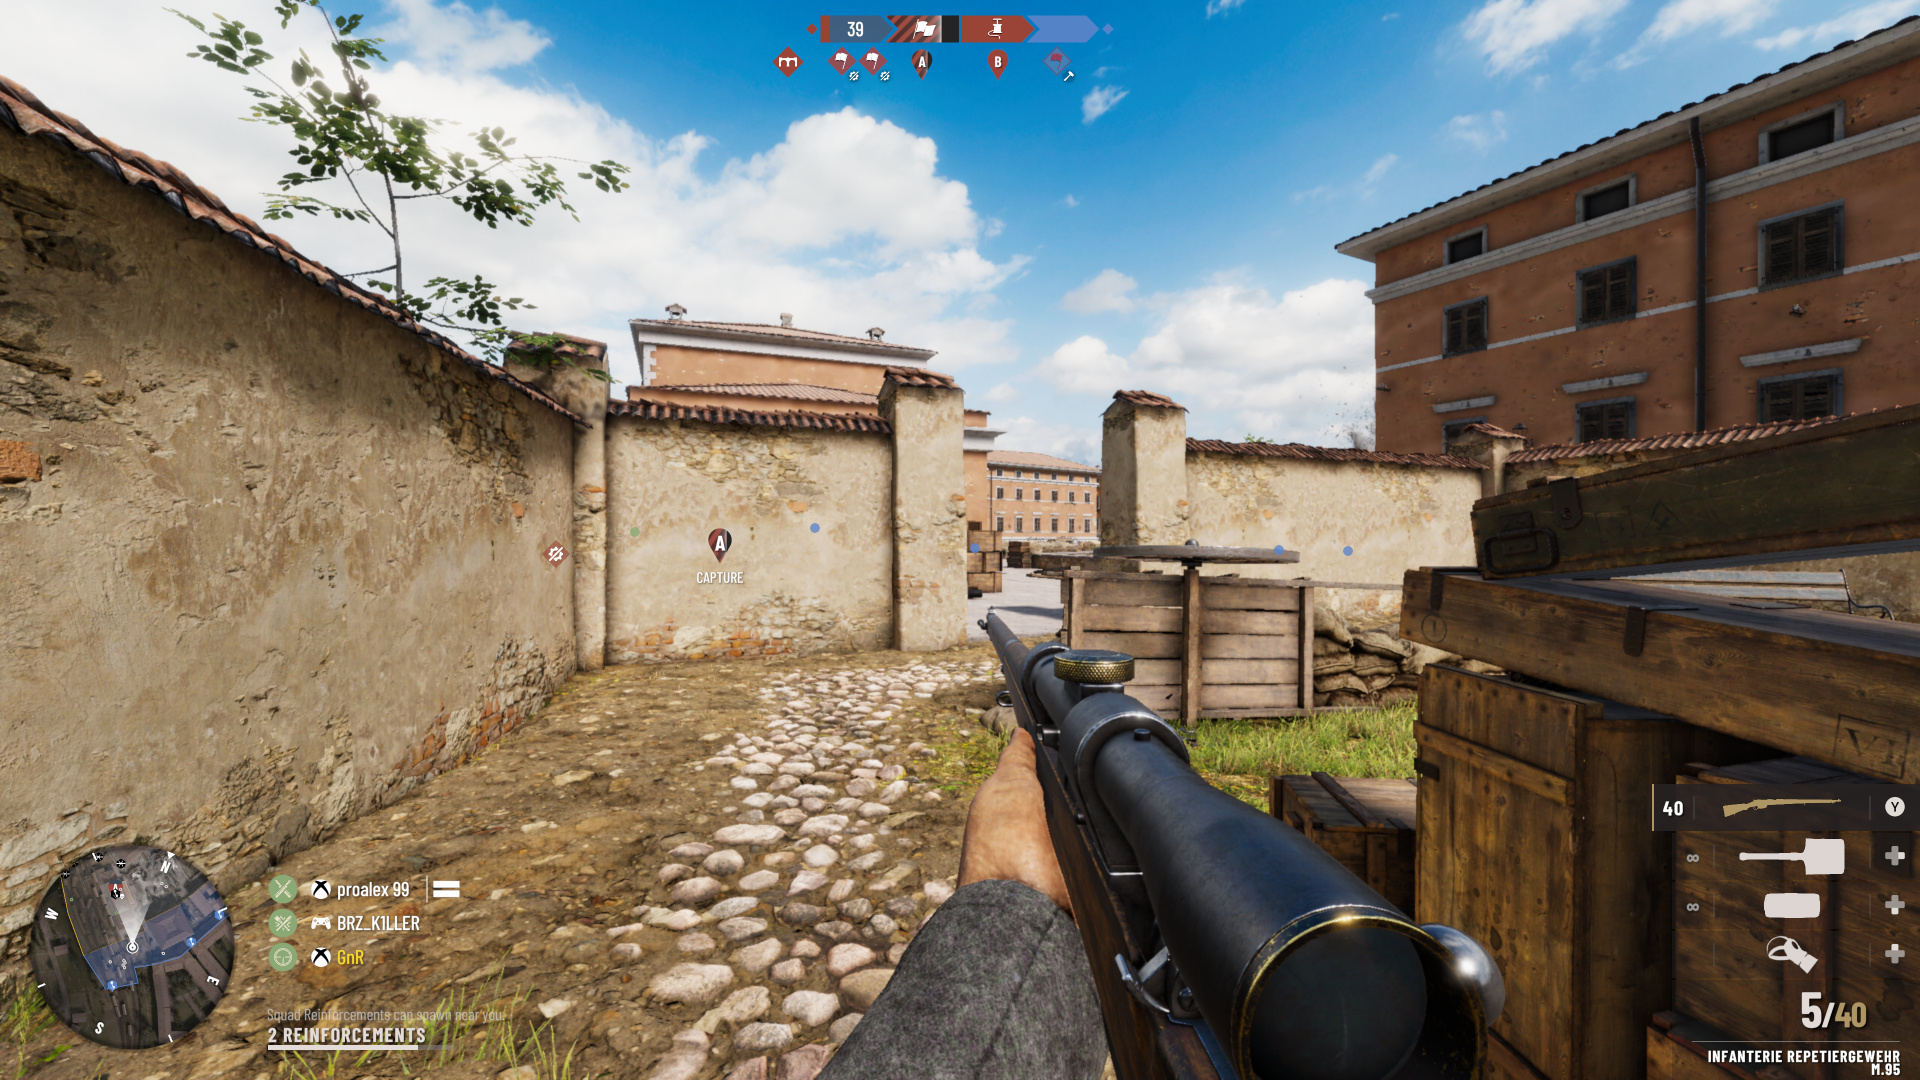 World War I First-Person Shooter Isonzo is Available Now - Xbox Wire